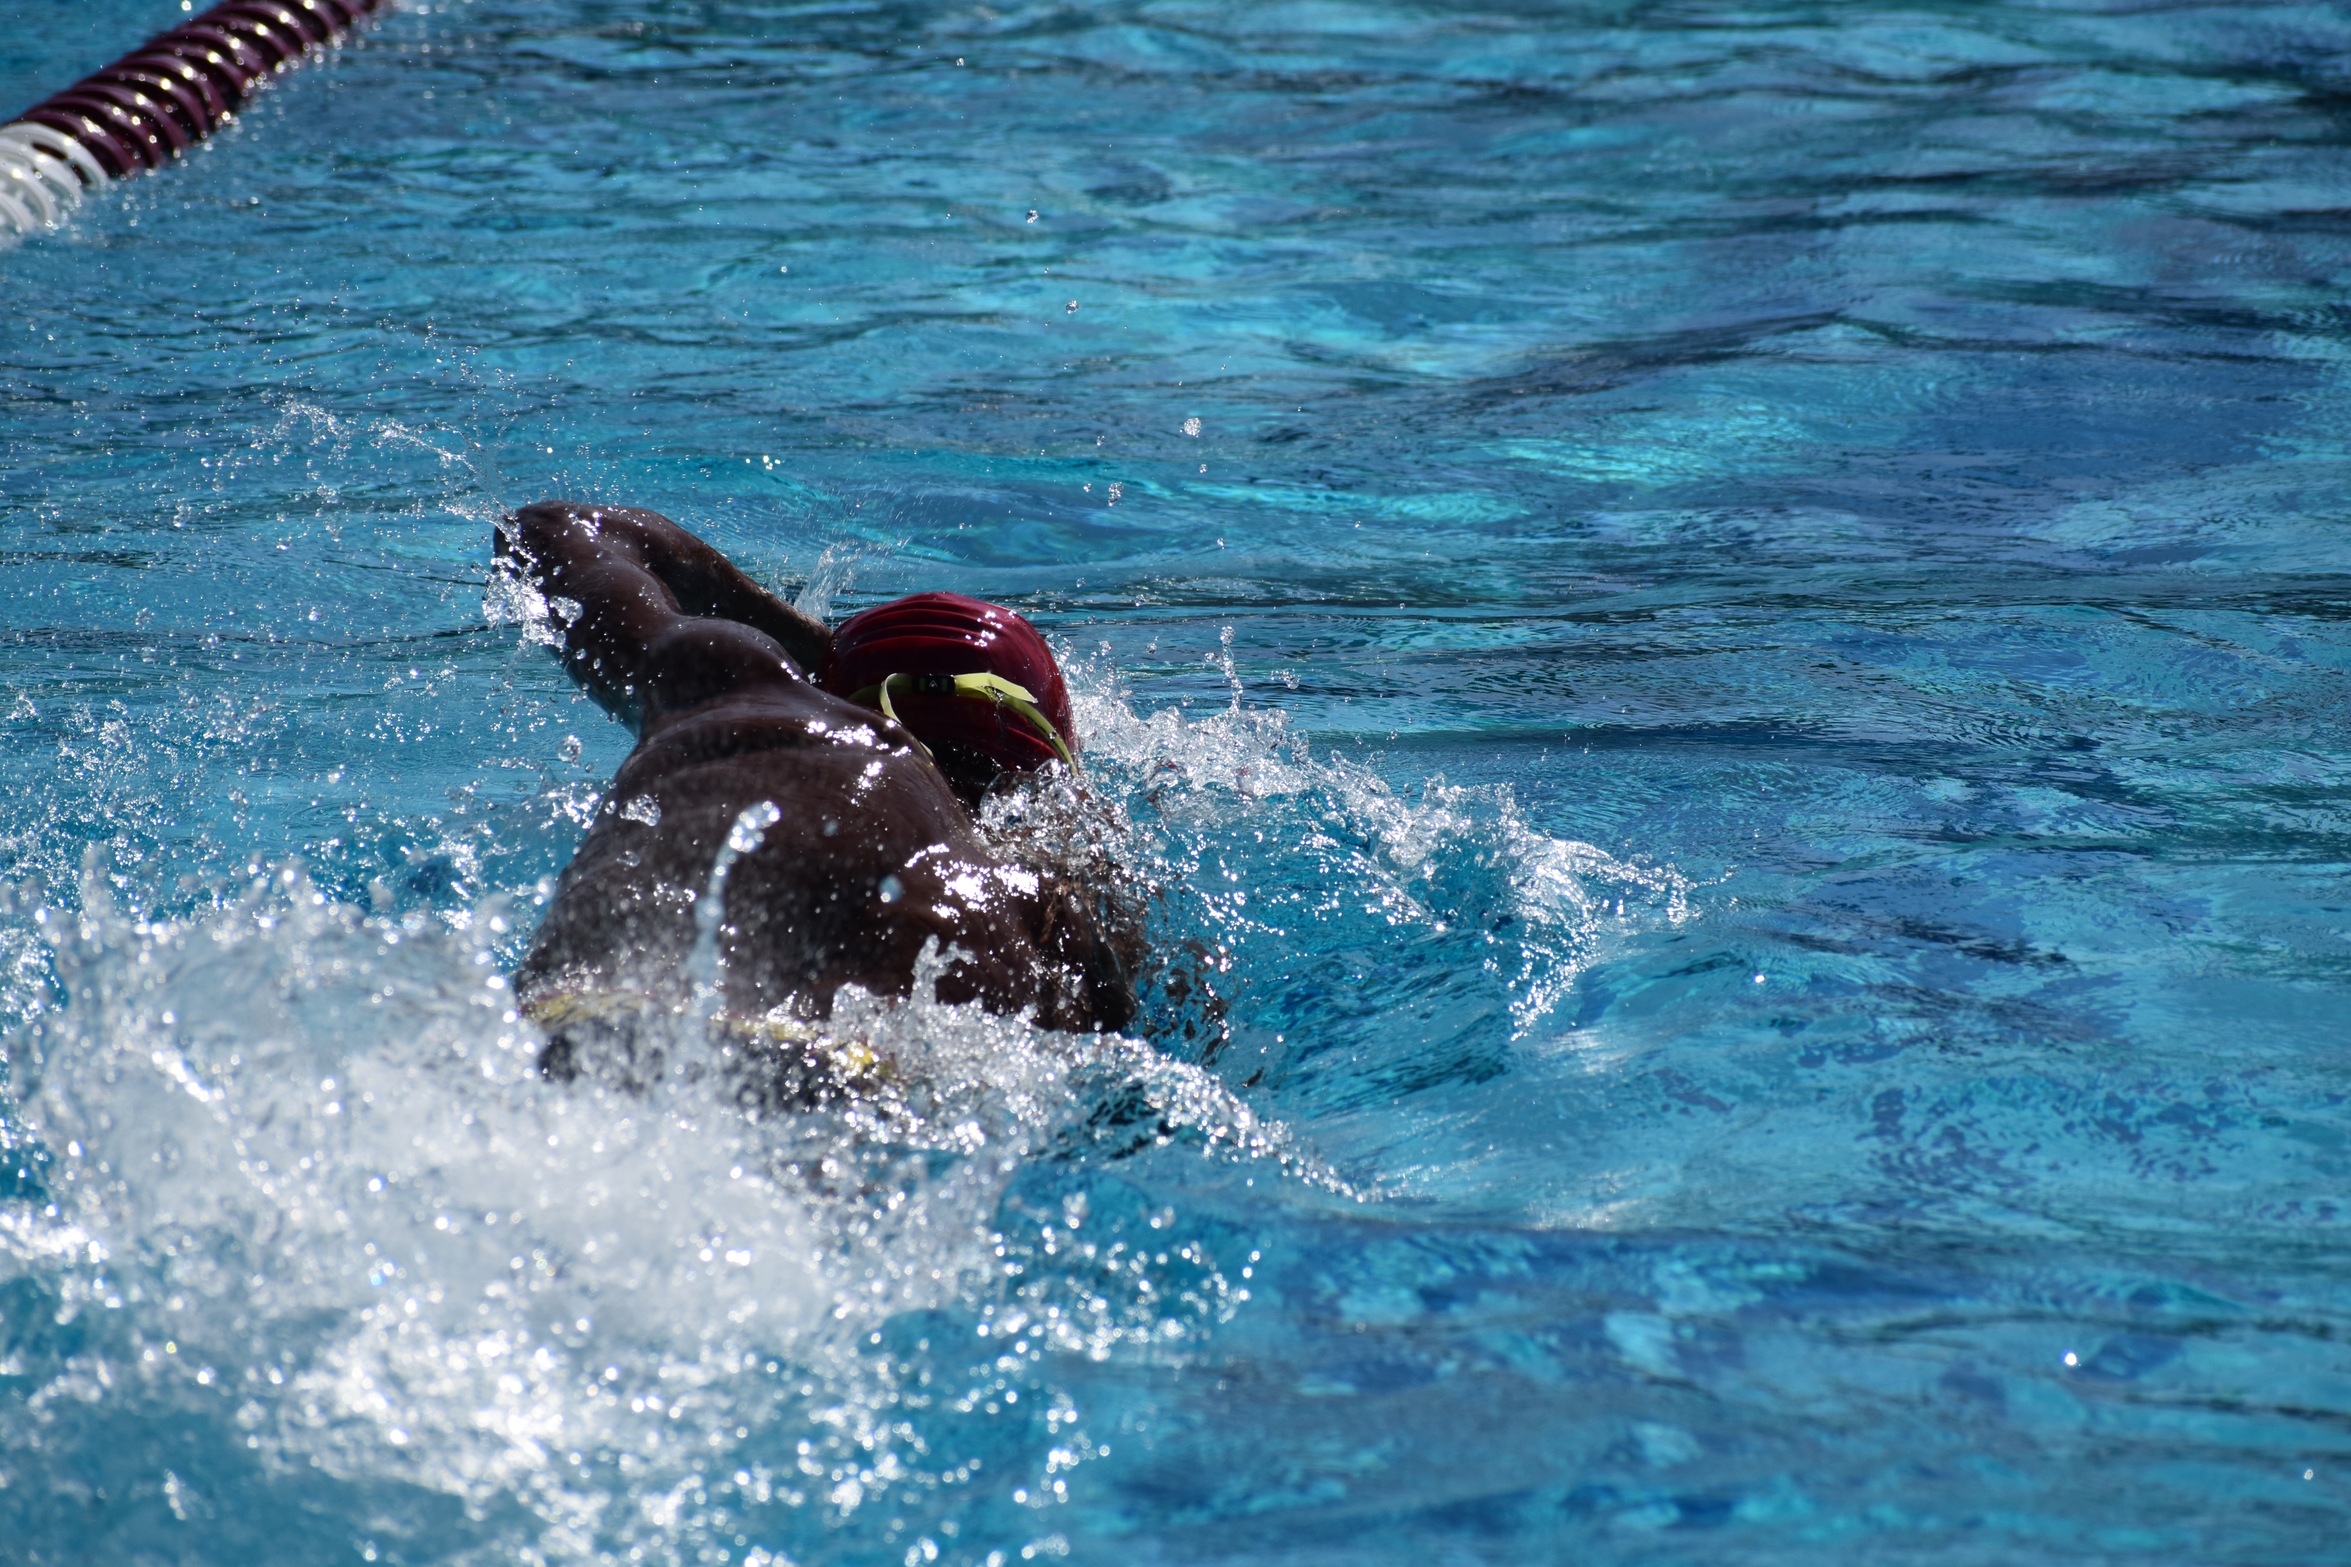 SWC competed in second pacific coast athletic conference swim meet at palomar college